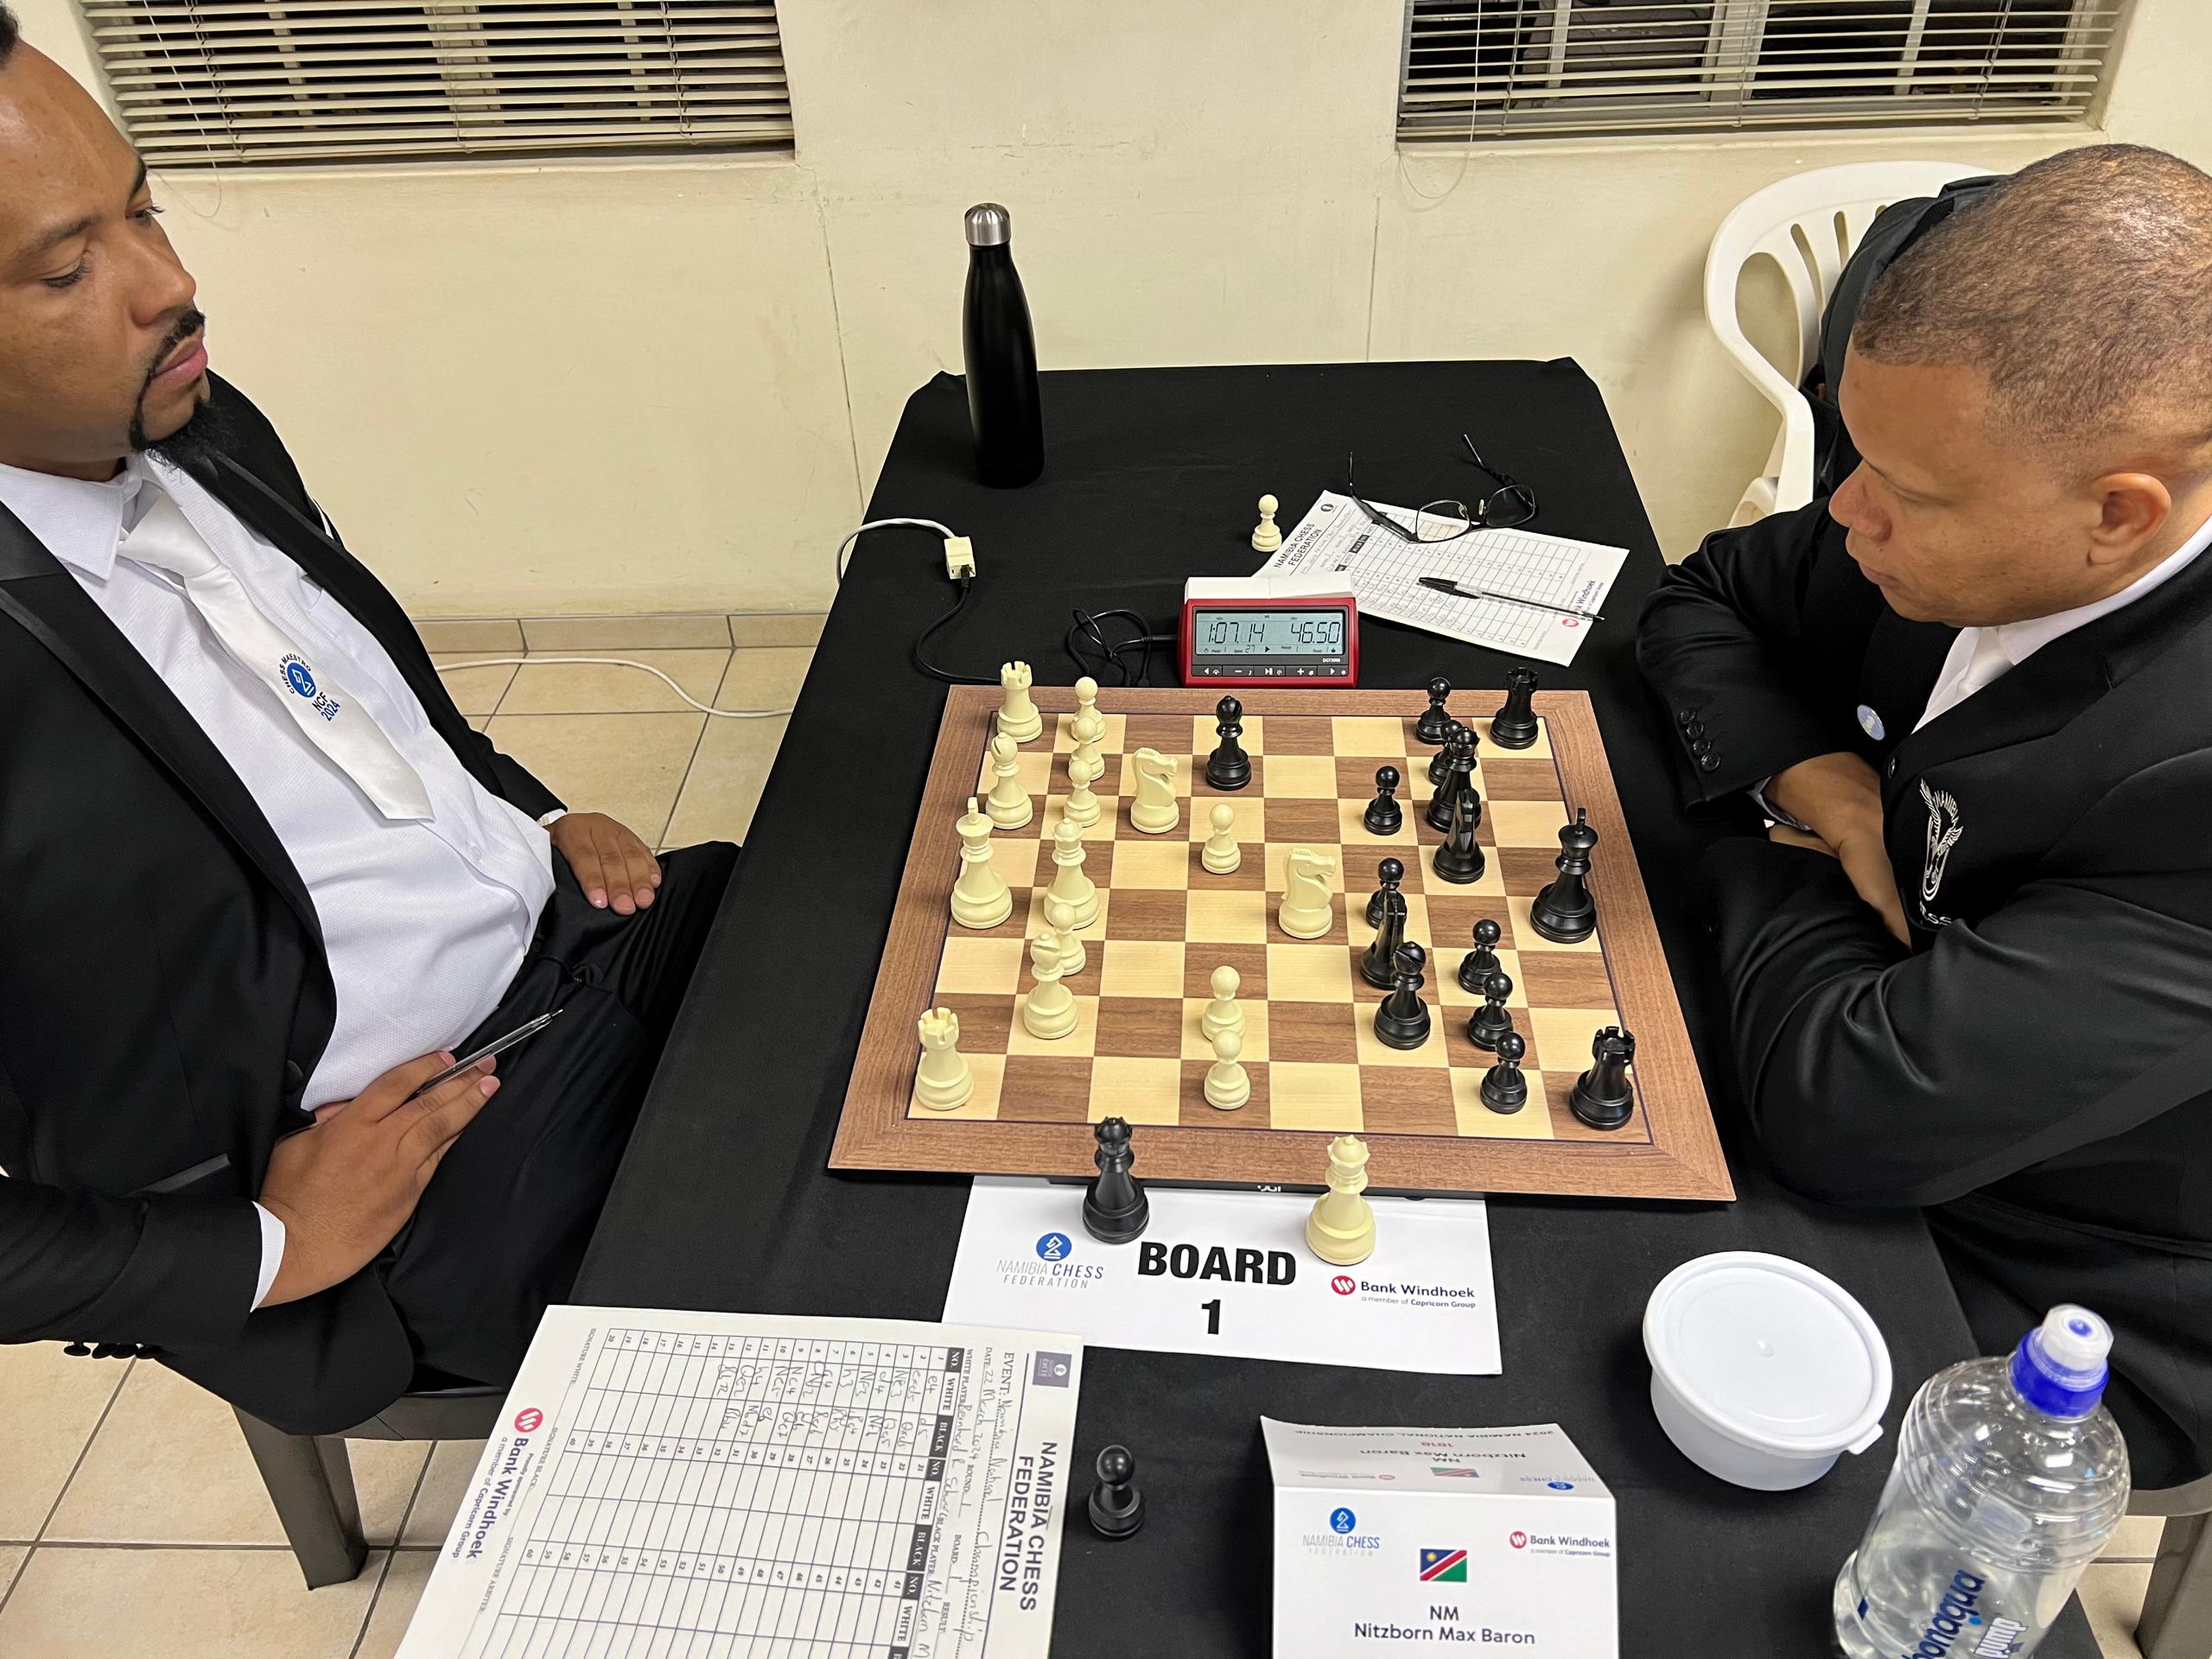 Bernhard Swhwarz (left) who was placed third with 6.5 points taking on Max Baron Nitzborn who scored four points and ended fifth in the ranking. Both players have qualified for the Olympiad Team.